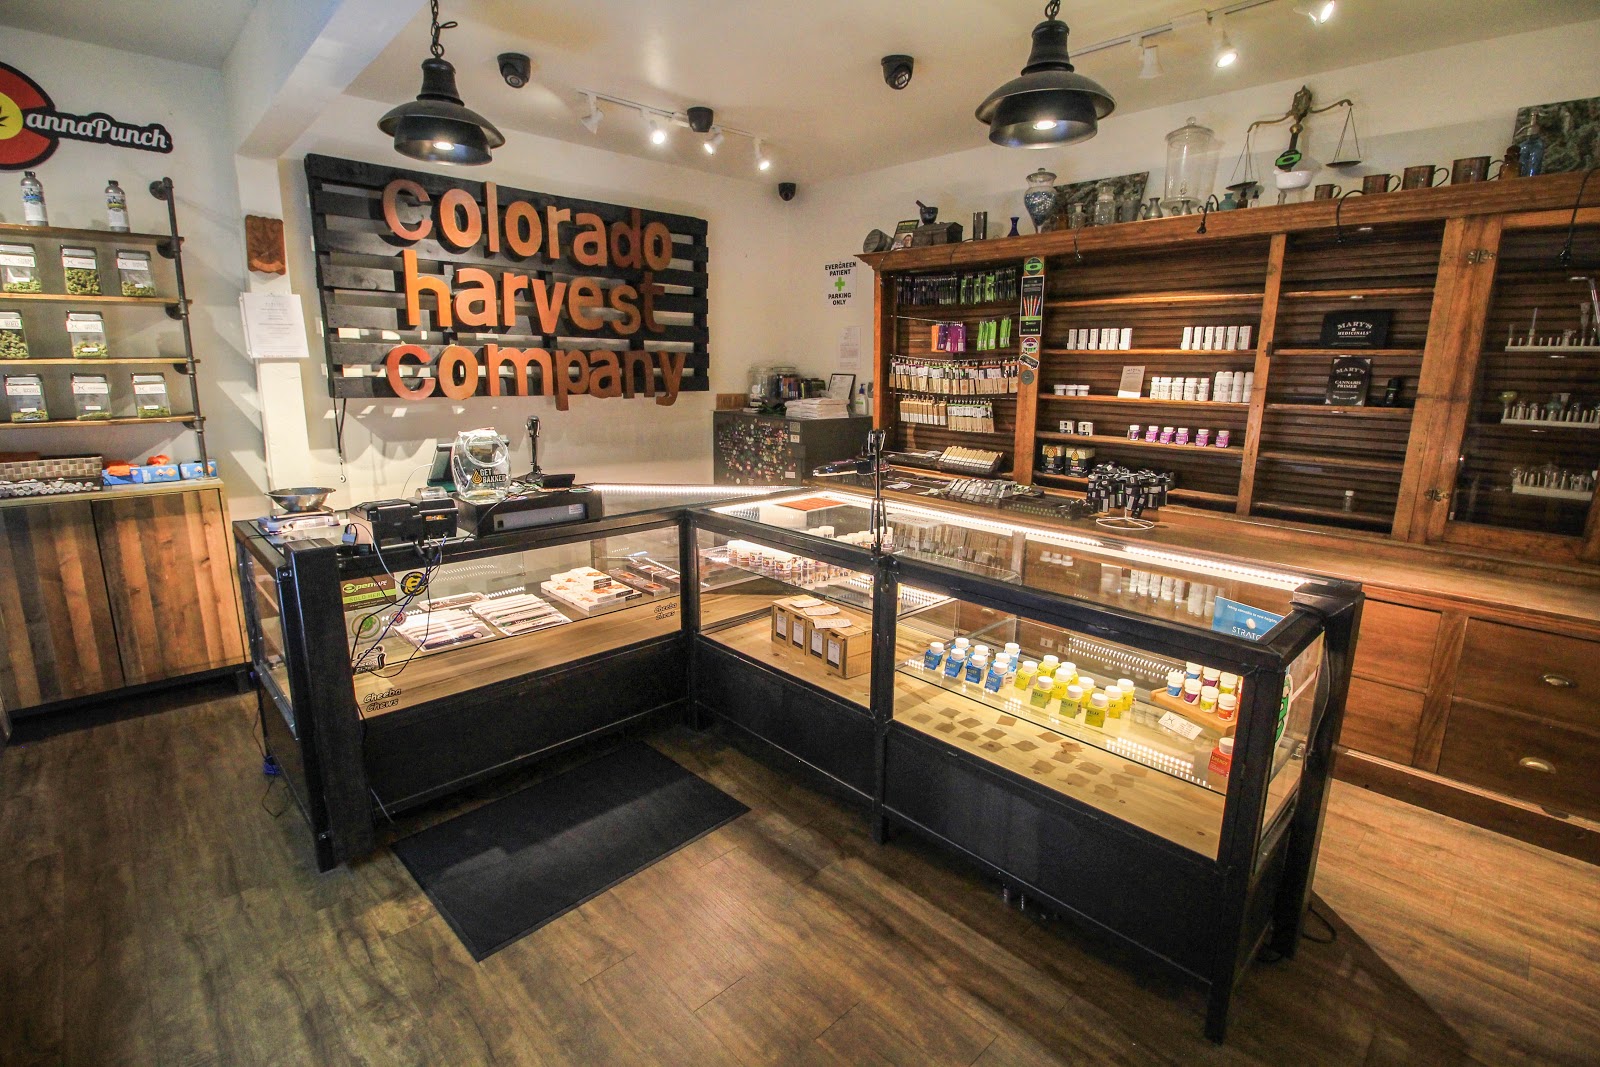 A Guide to Making Cannabis Dispensaries Safer During COVID - NextME